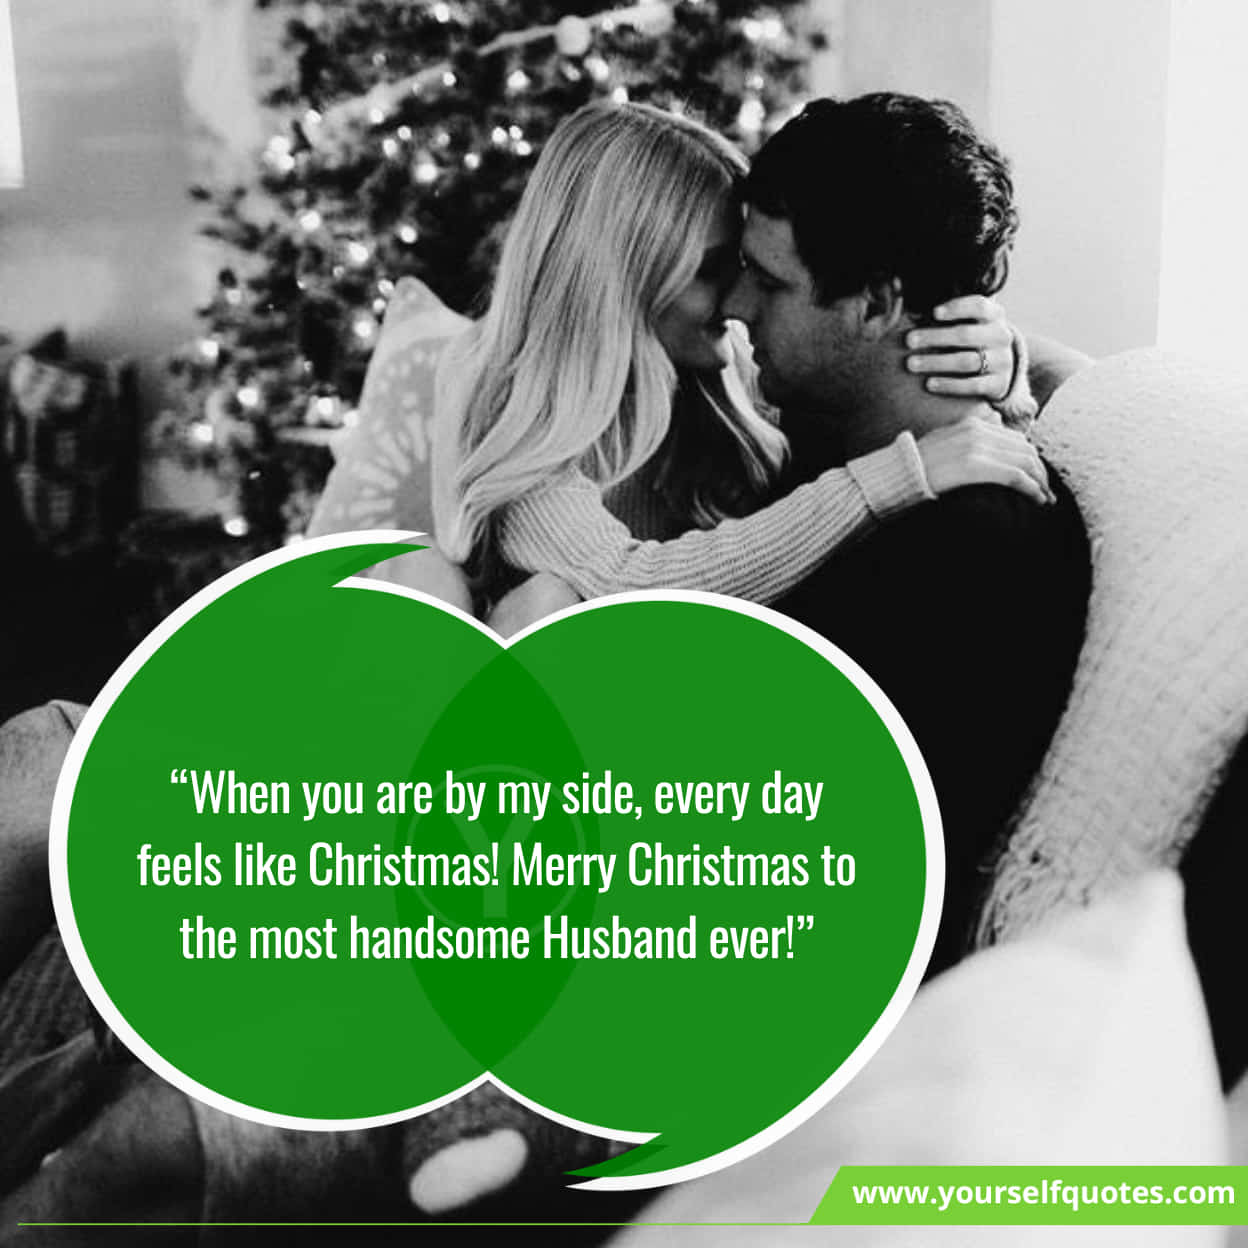 Christmas Wishes Messages for Husband